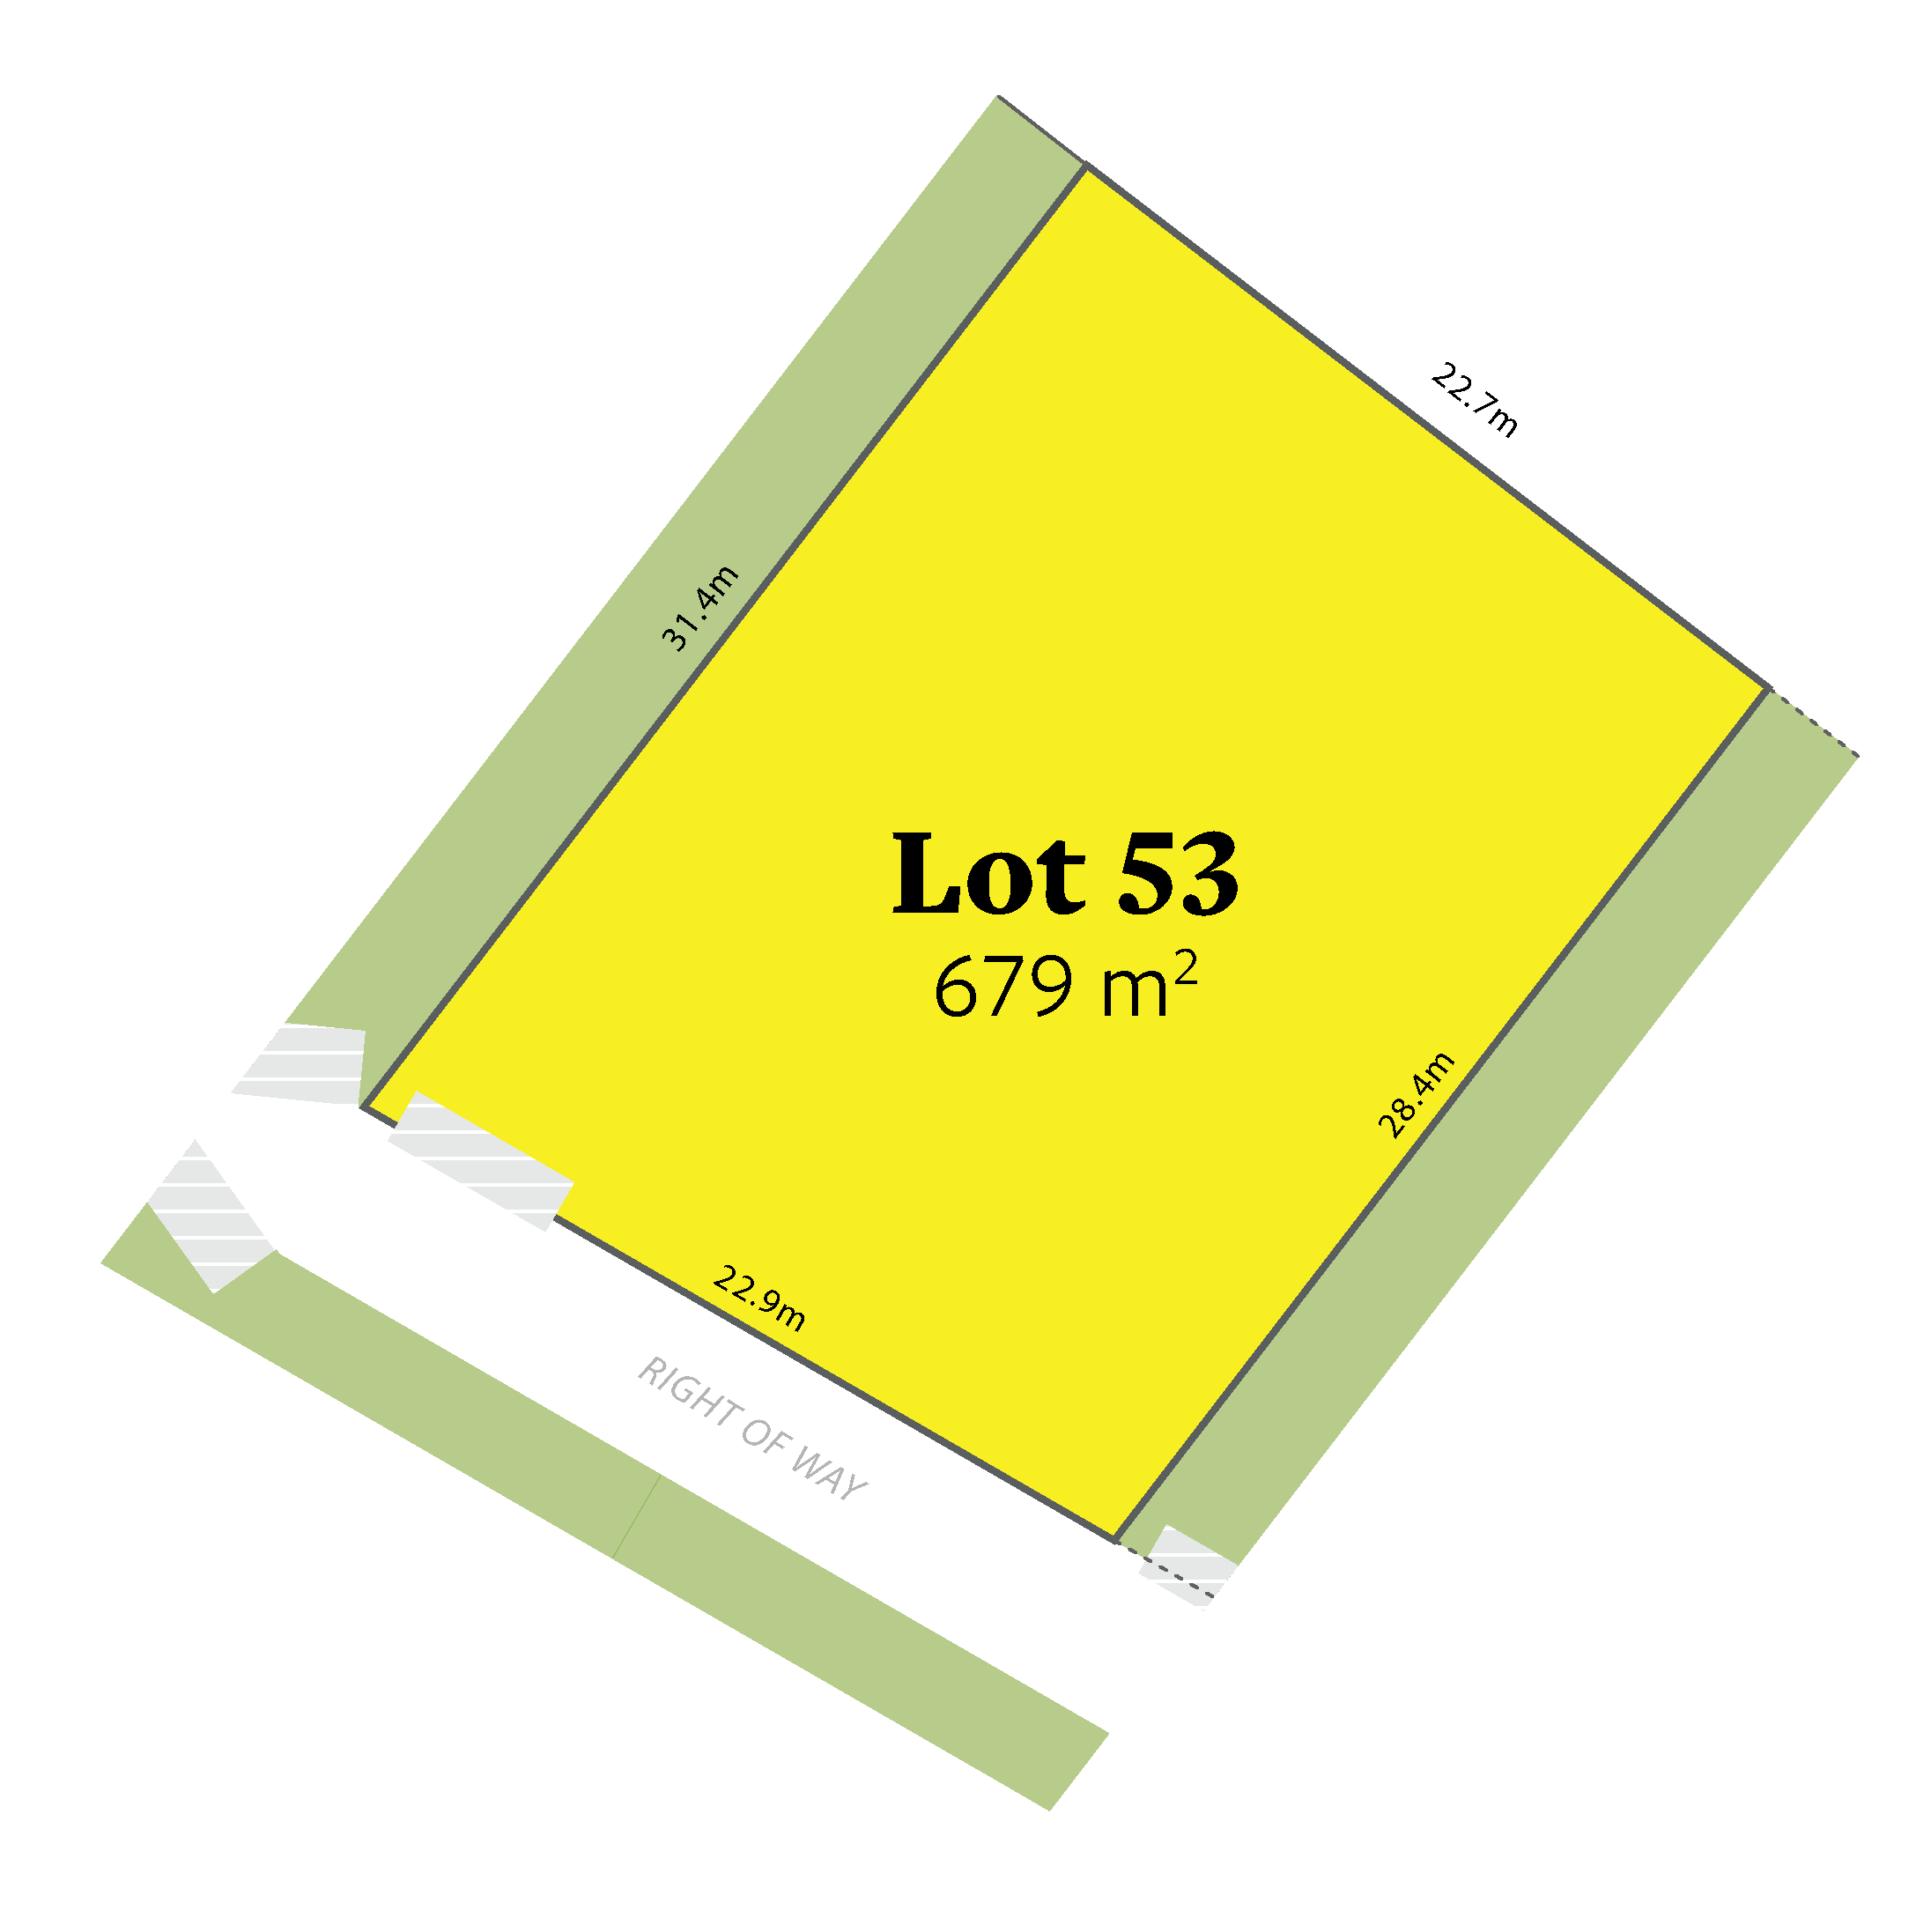 Image of Lot 53